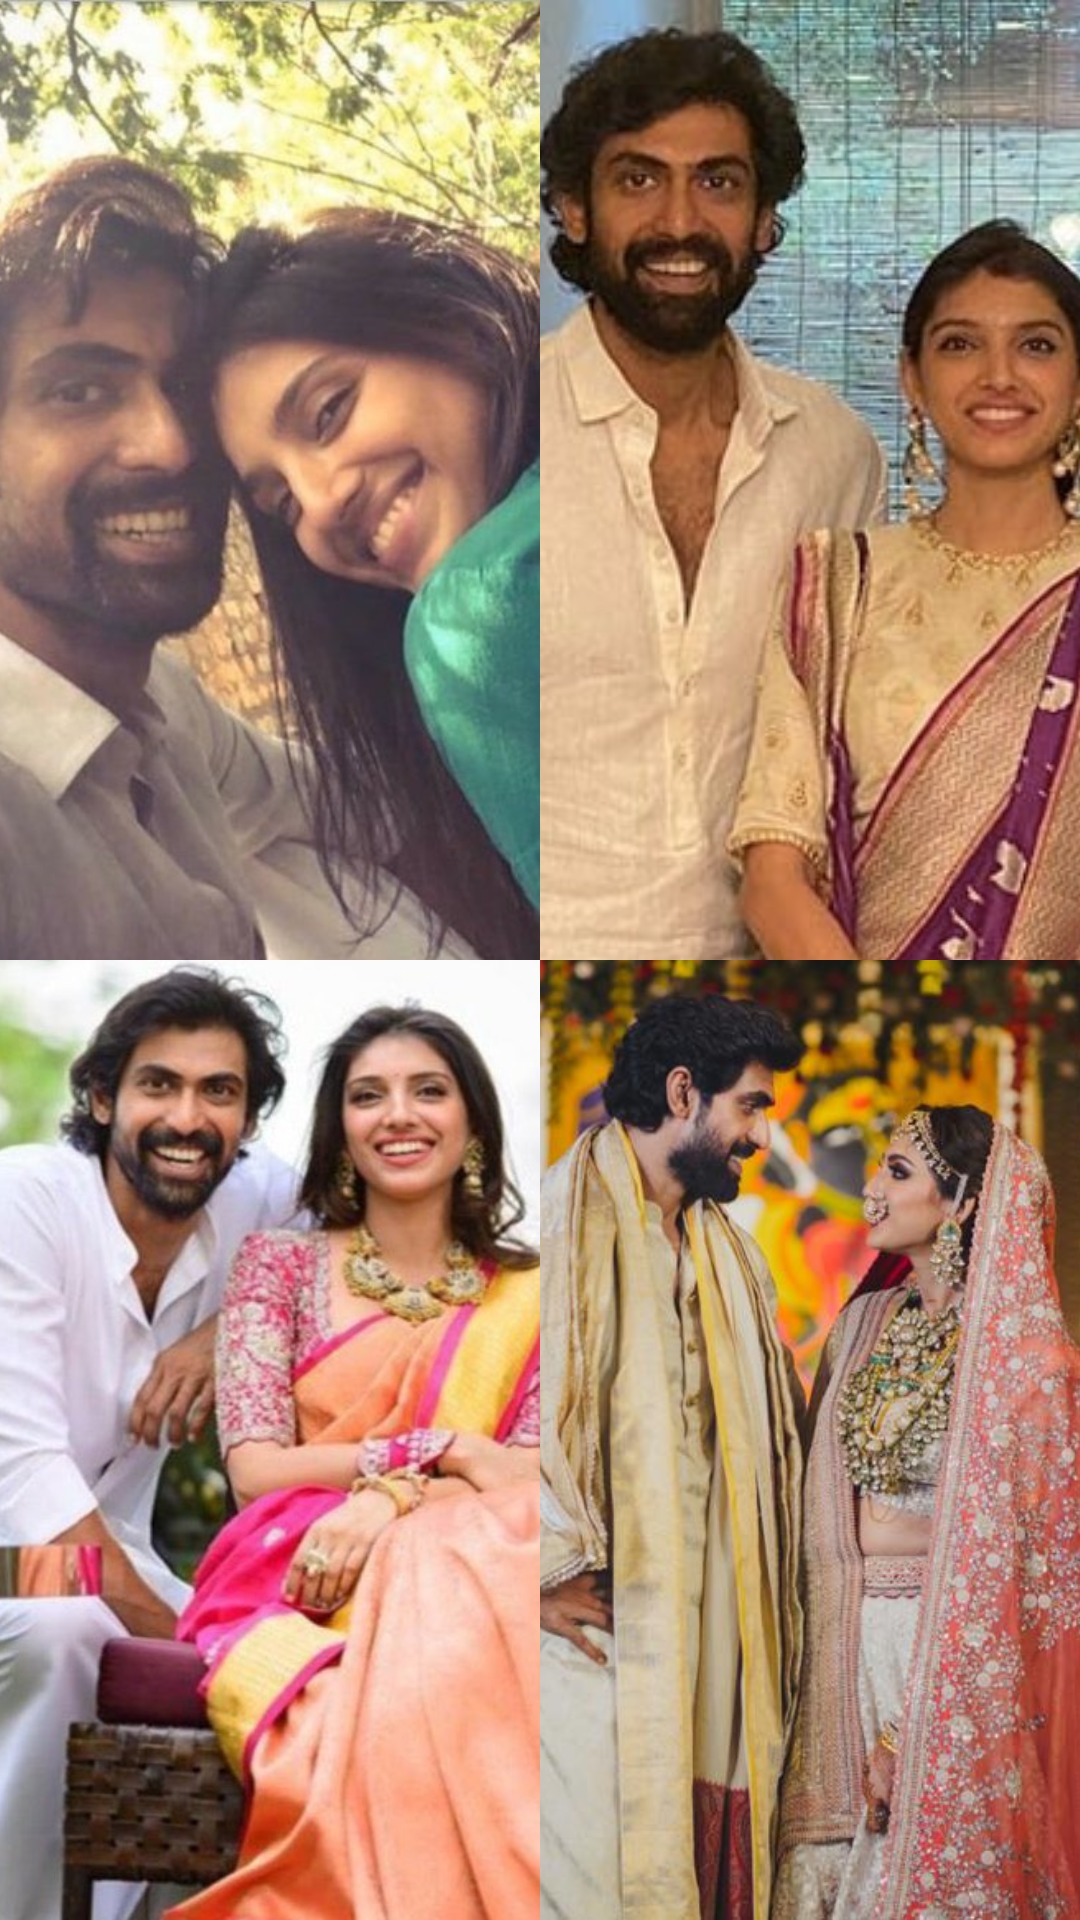 Rana Daggubati is celebrating his 38th birthday today. On the celebratory occasion, let's have a look at his mushy, romantic &amp; unseen photos with love Miheeka Bajaj.